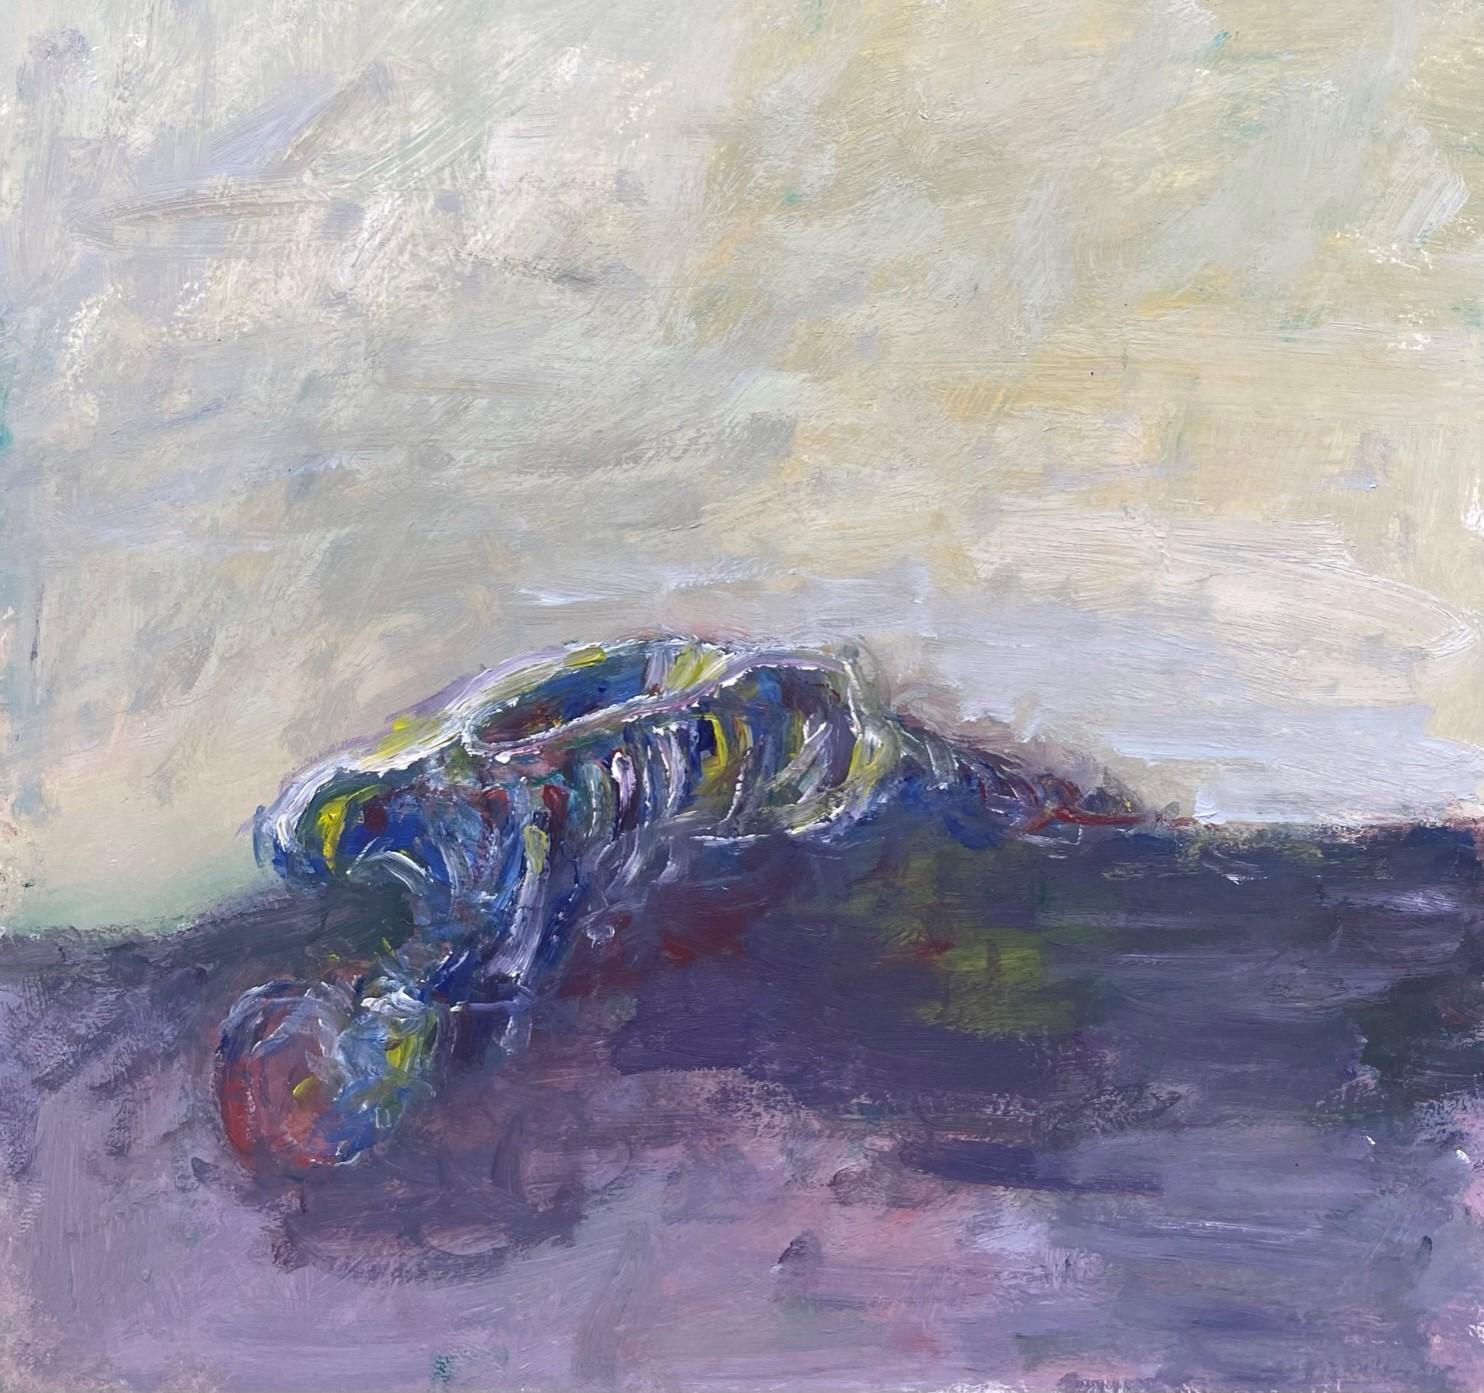 Remains (Body in the Field 11), 2022
oil on paper
16 17/32 h x 11 13/16 w in.
42 H x 30 W cm

Zsolt Berszán embodies in his works the dissolution of the human body through the prism of the fragment, the body in pieces, and the skeletal carcass. It